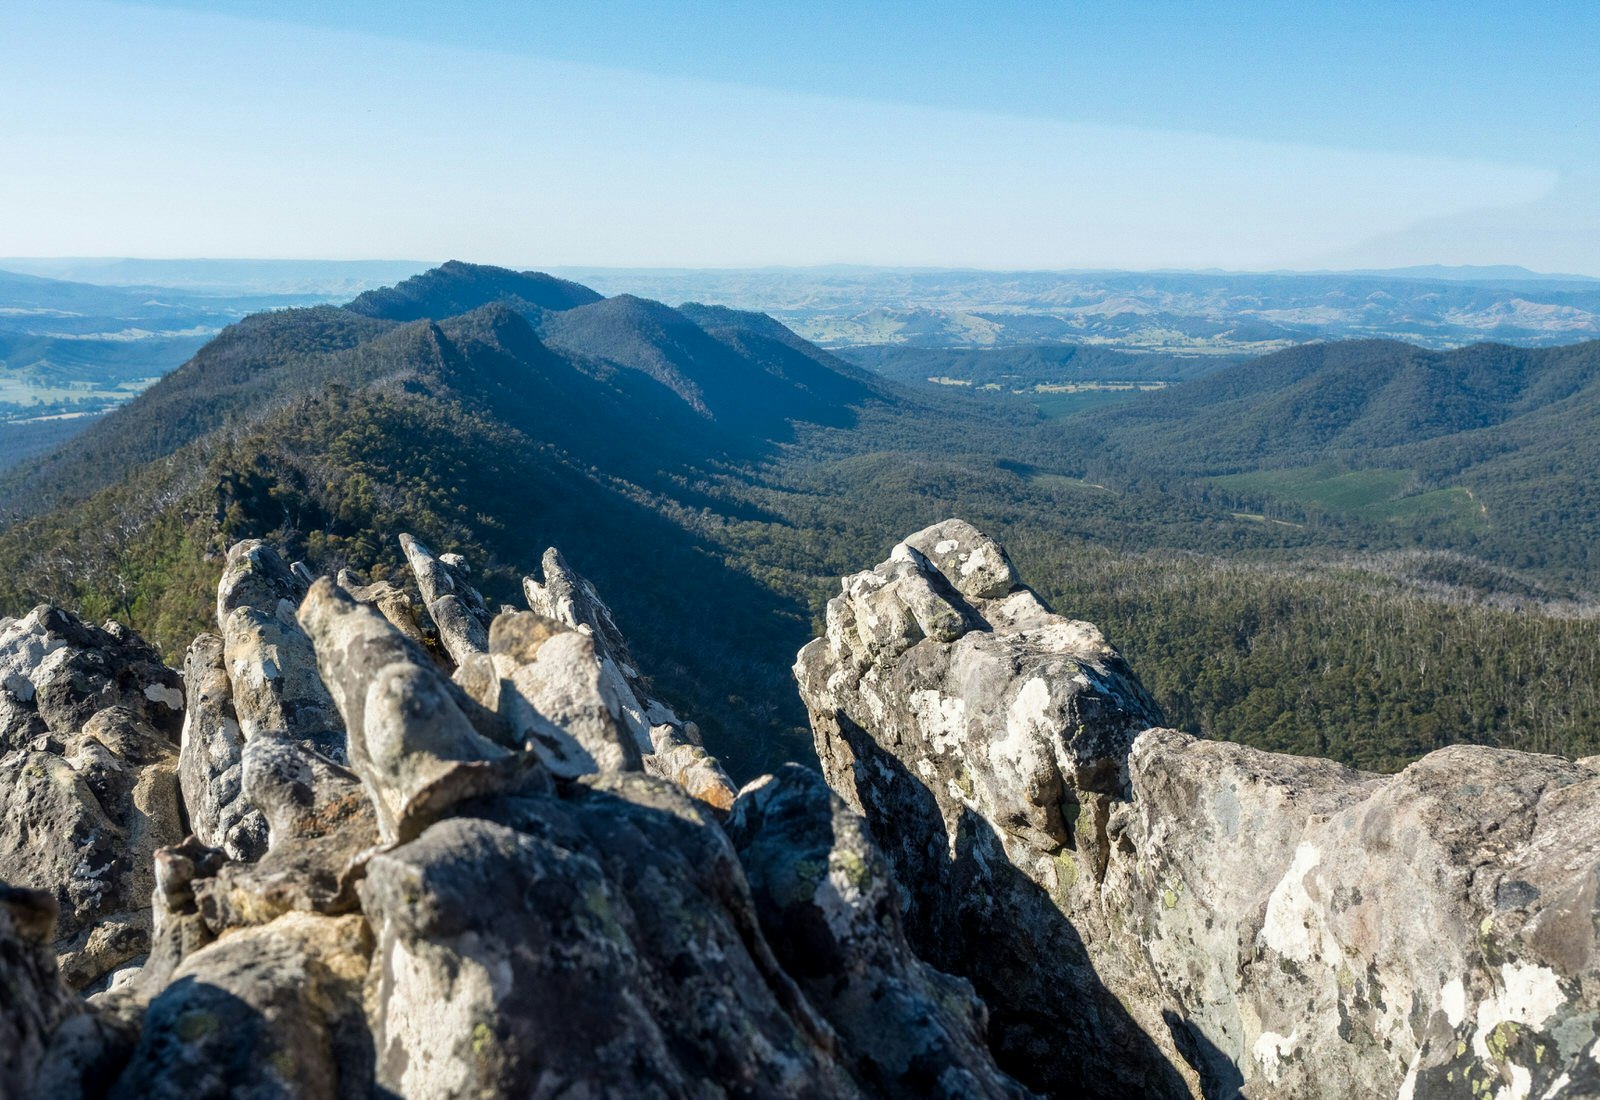 A panoramic shot of Cathedral Ranges State Park in Victoria. The sky is clear and blue and there are tree-covered hills all the way to the horizon. In the immediate foreground there is a worn formation of grey rock.